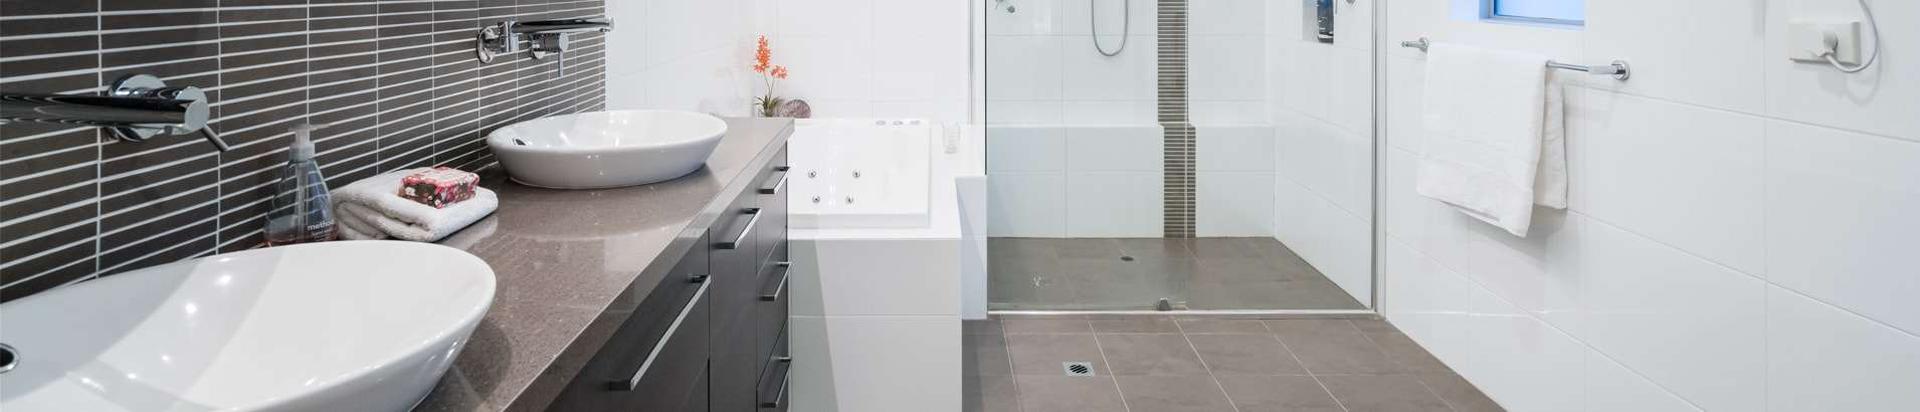 Your one stop destination for bathrooms solutions and bathroom products like furniture, showers and suites. Contemporary, elegant and always high quality. We are among the best bathroom suppliers.